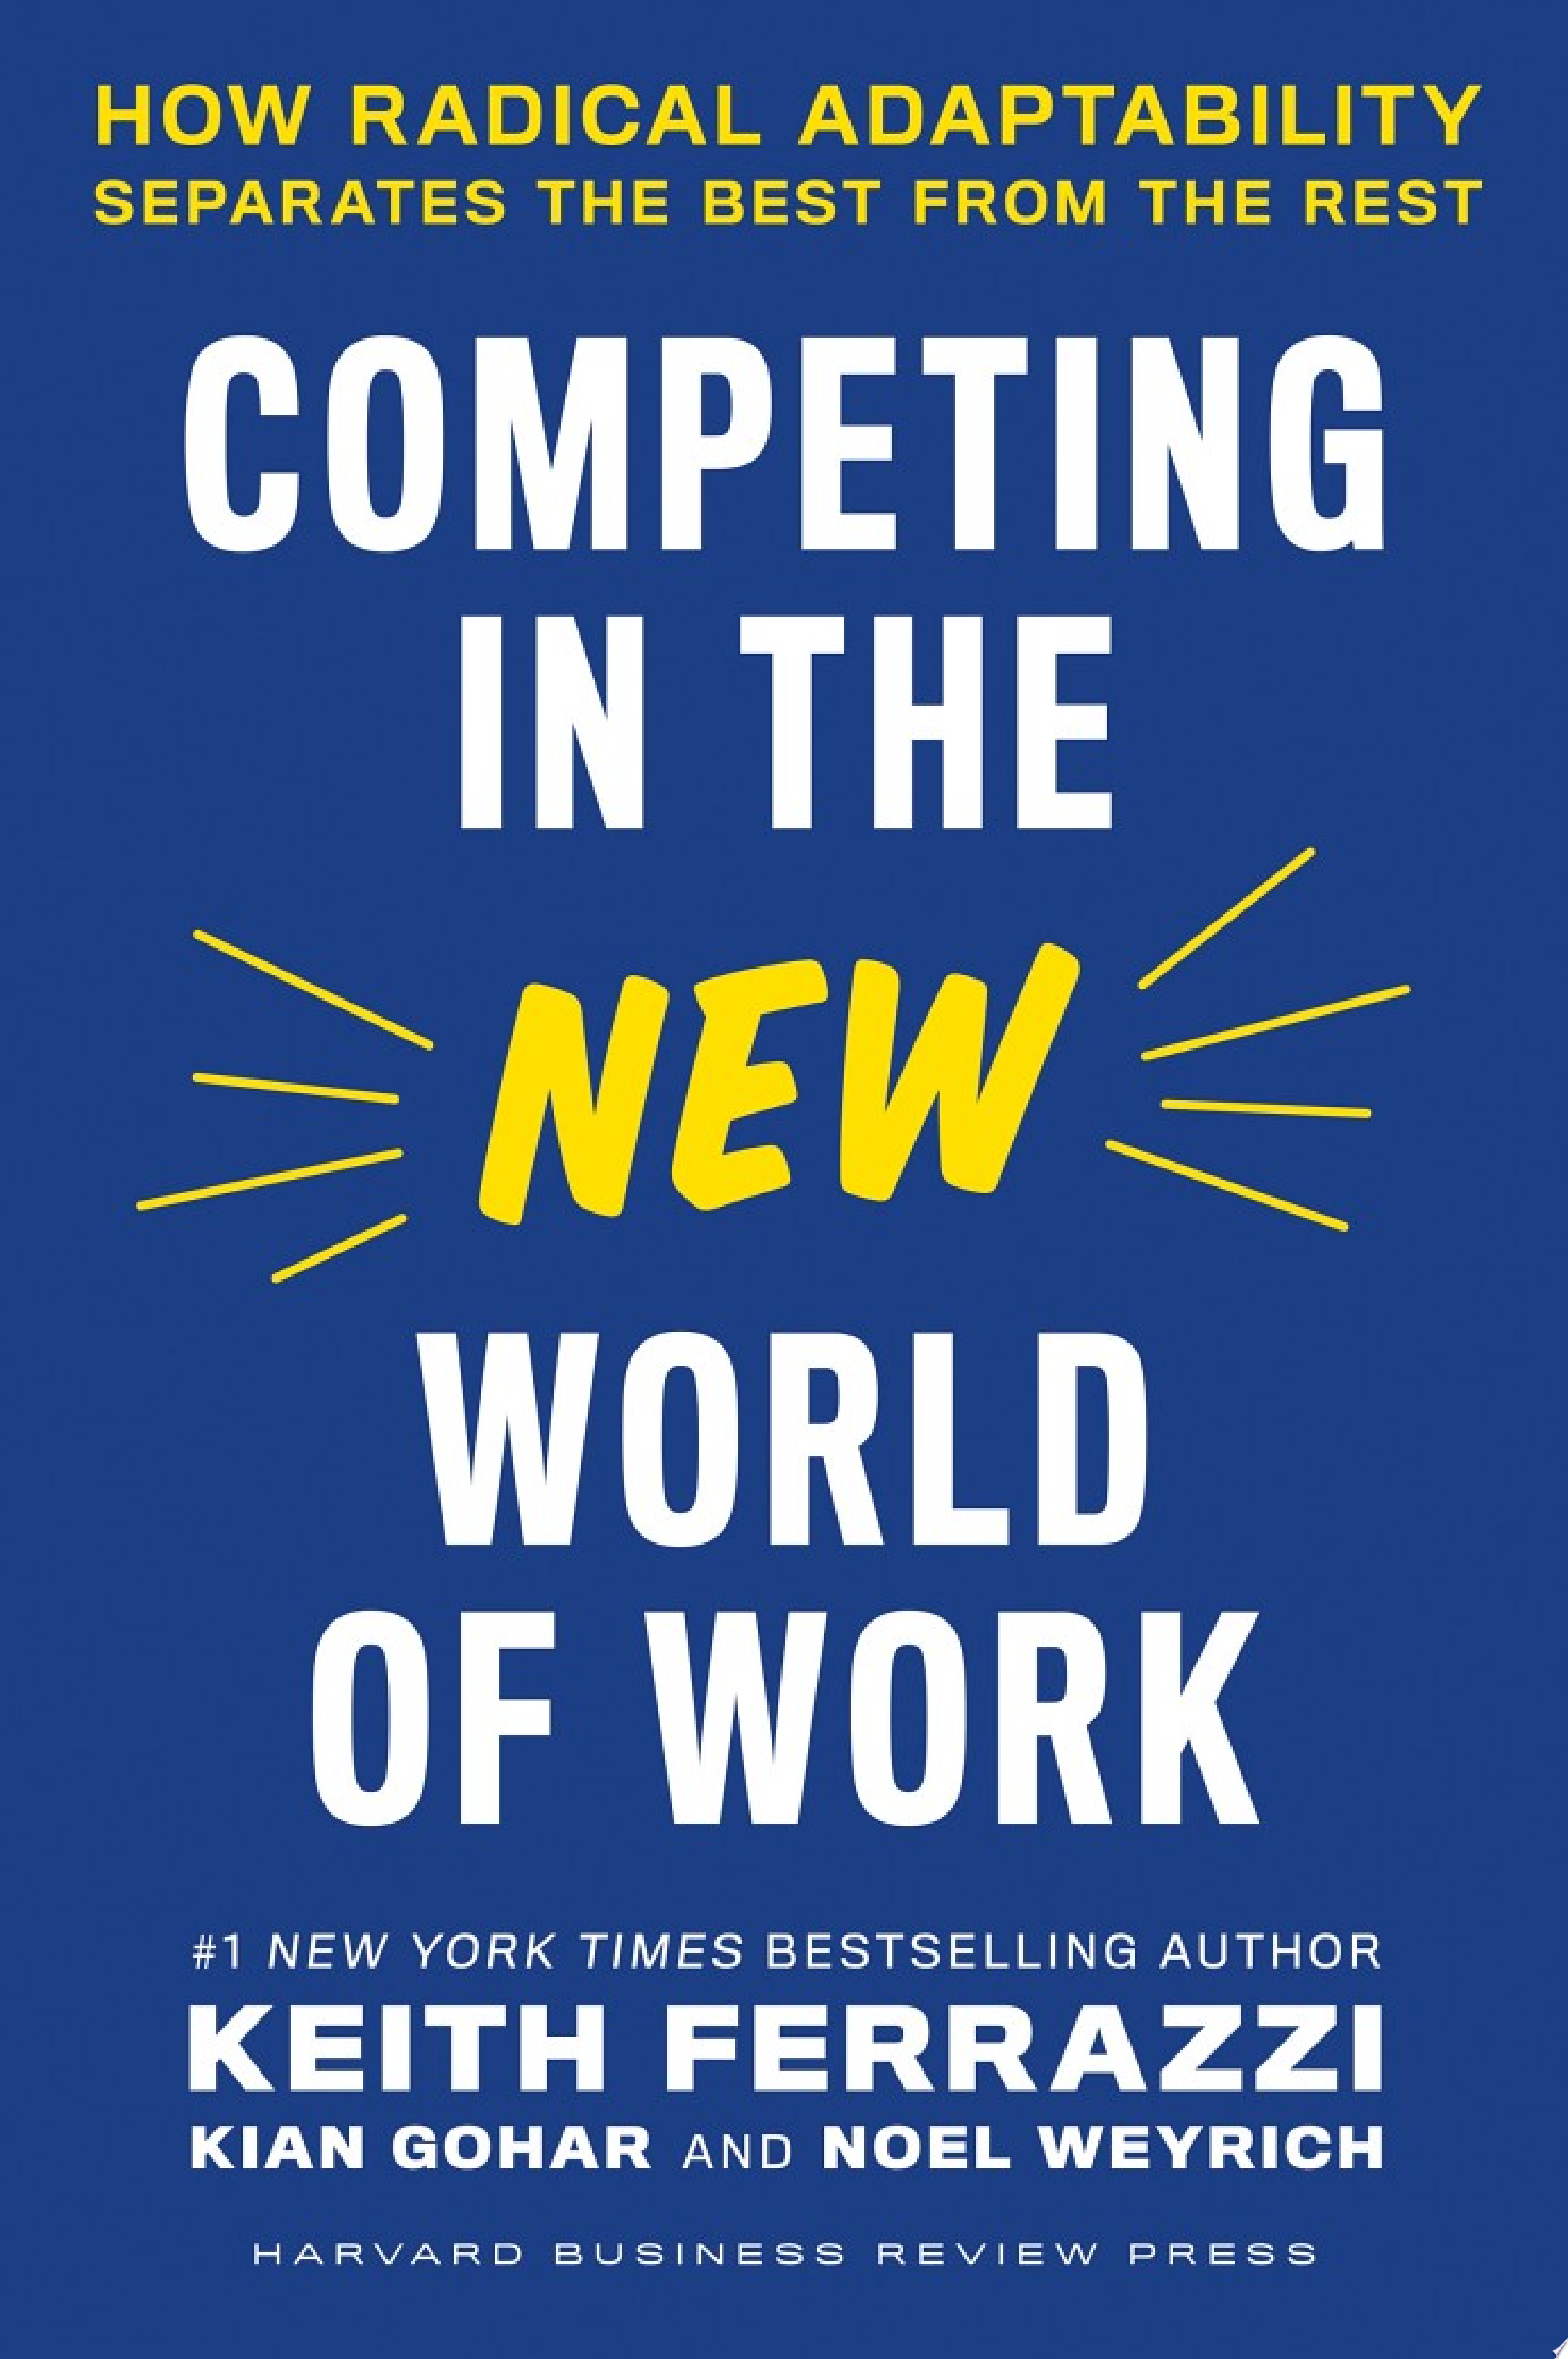 Image for "Competing in the New World of Work"